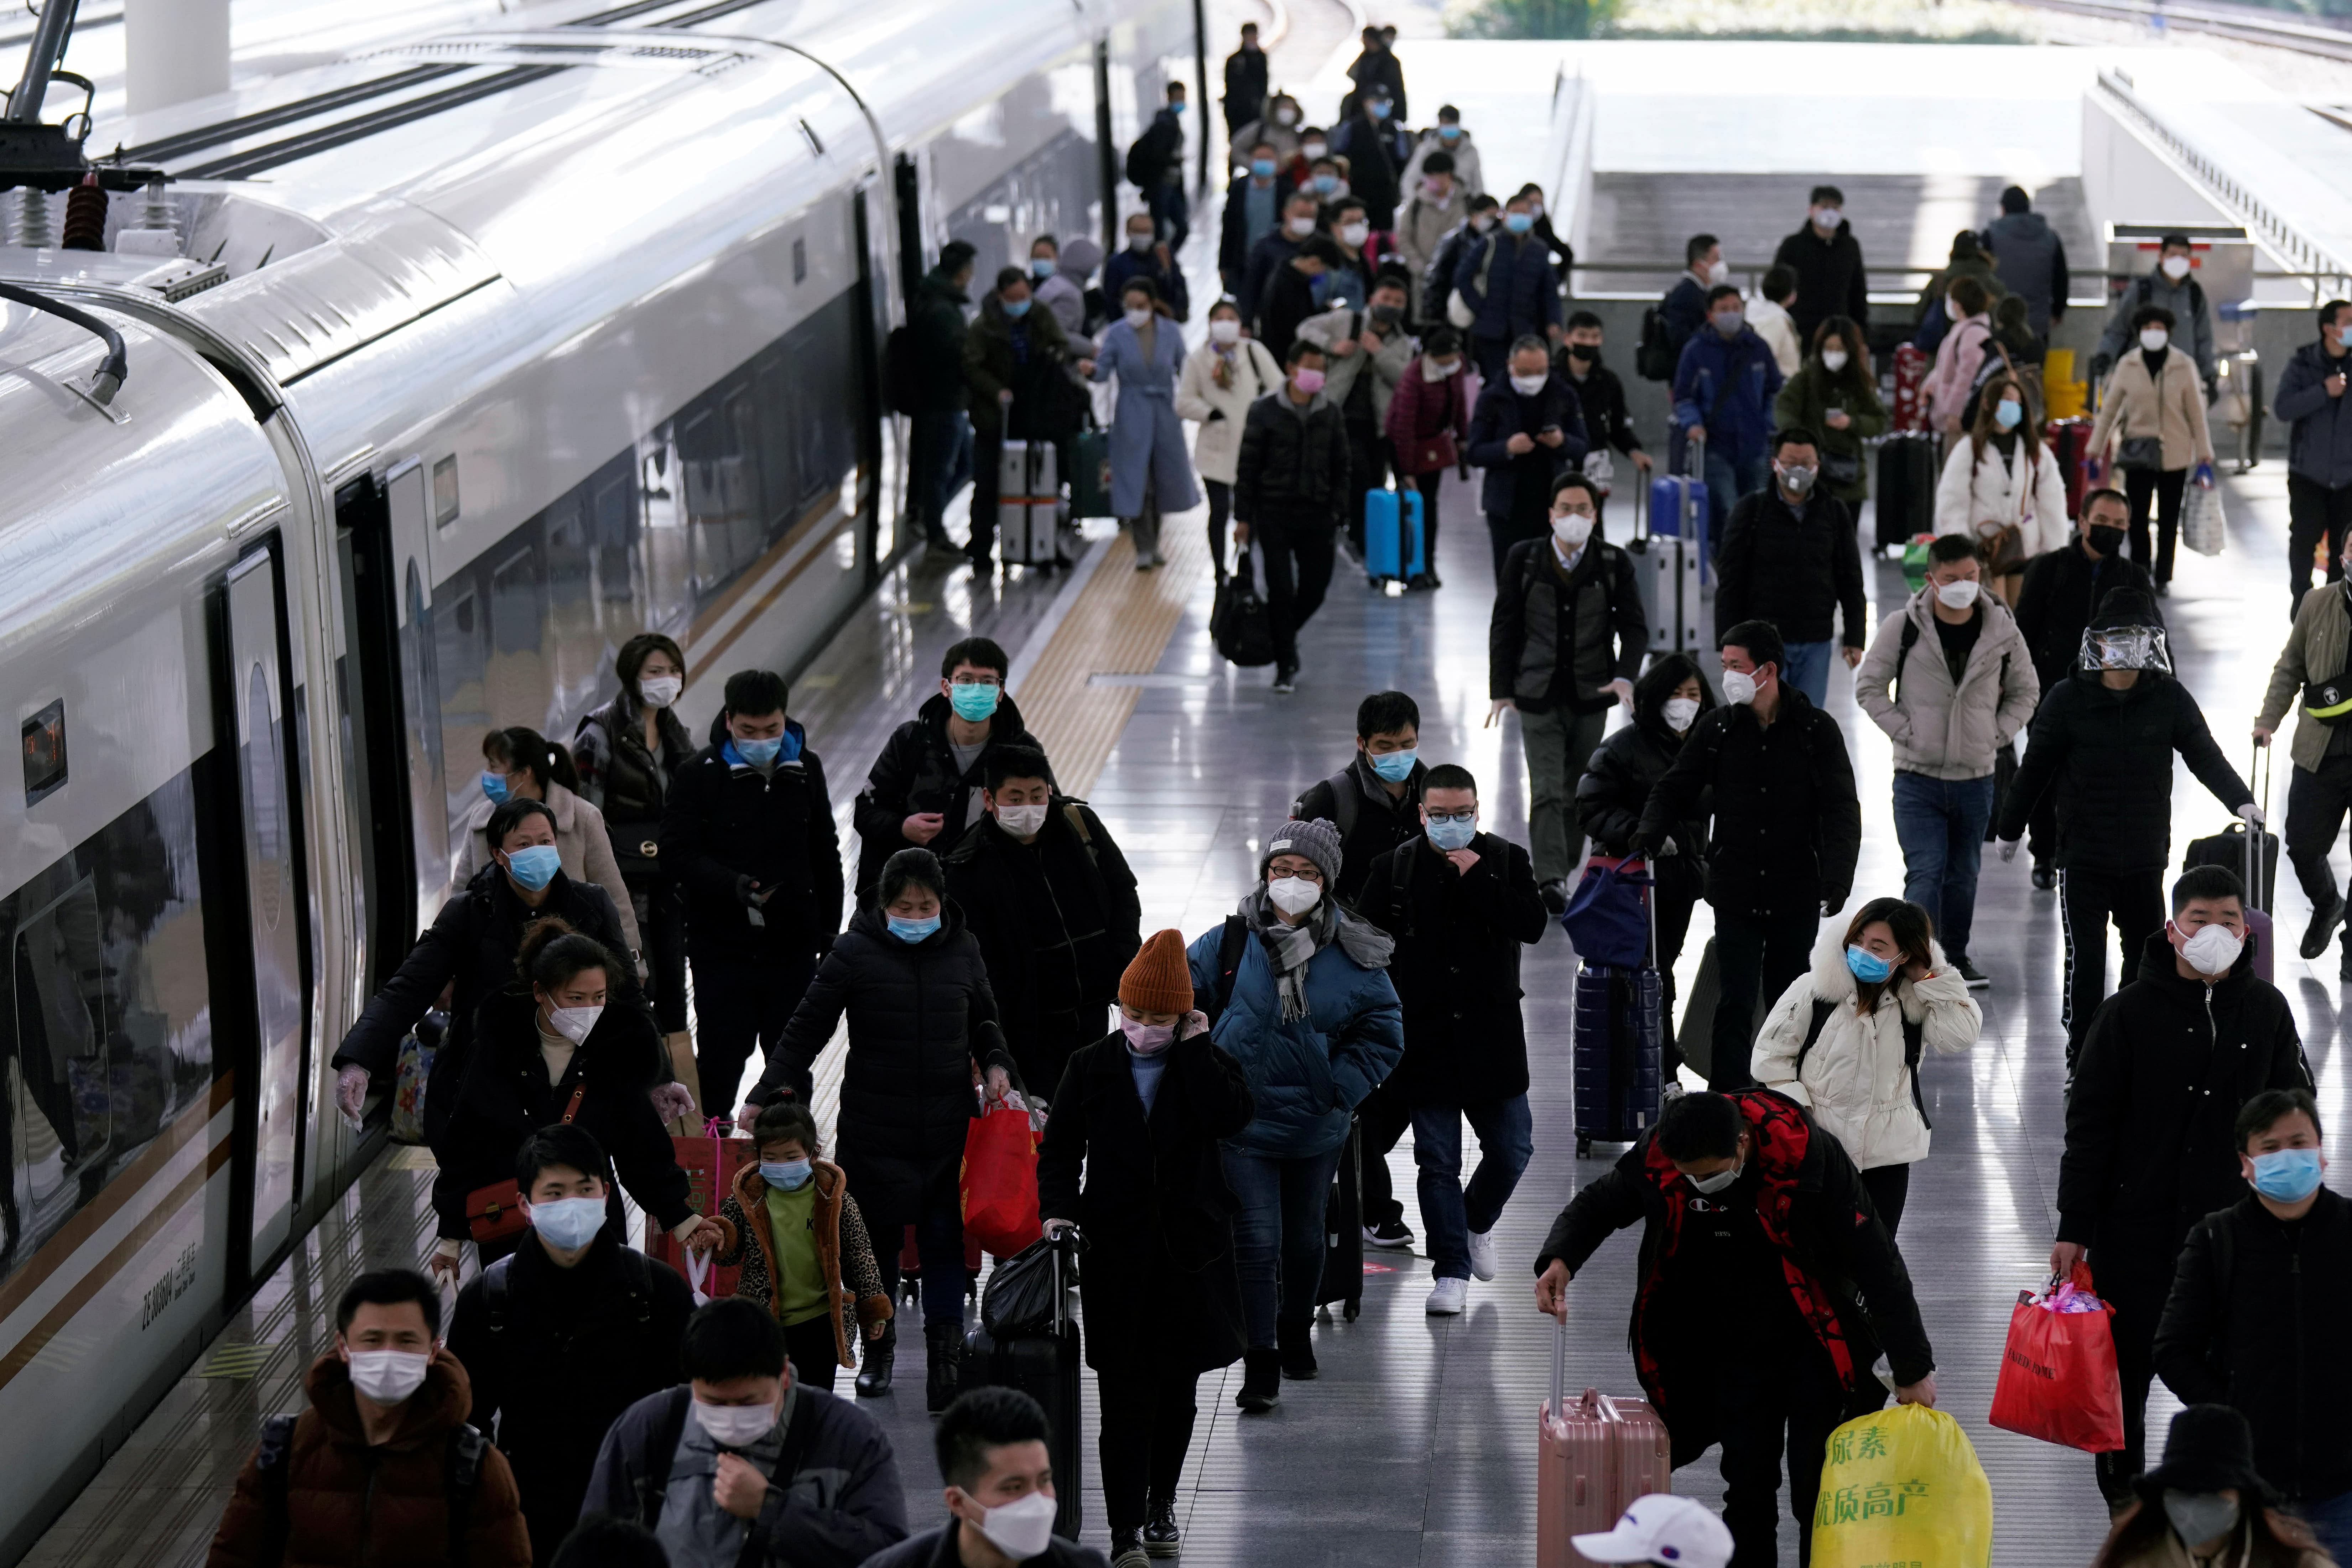 Passengers wearing masks are seen arrival at the Shanghai railway station in Shanghai, China, as the country is hit by an outbreak of a new coronavirus, February 27, 2020. (Credit: Reuters Photo)